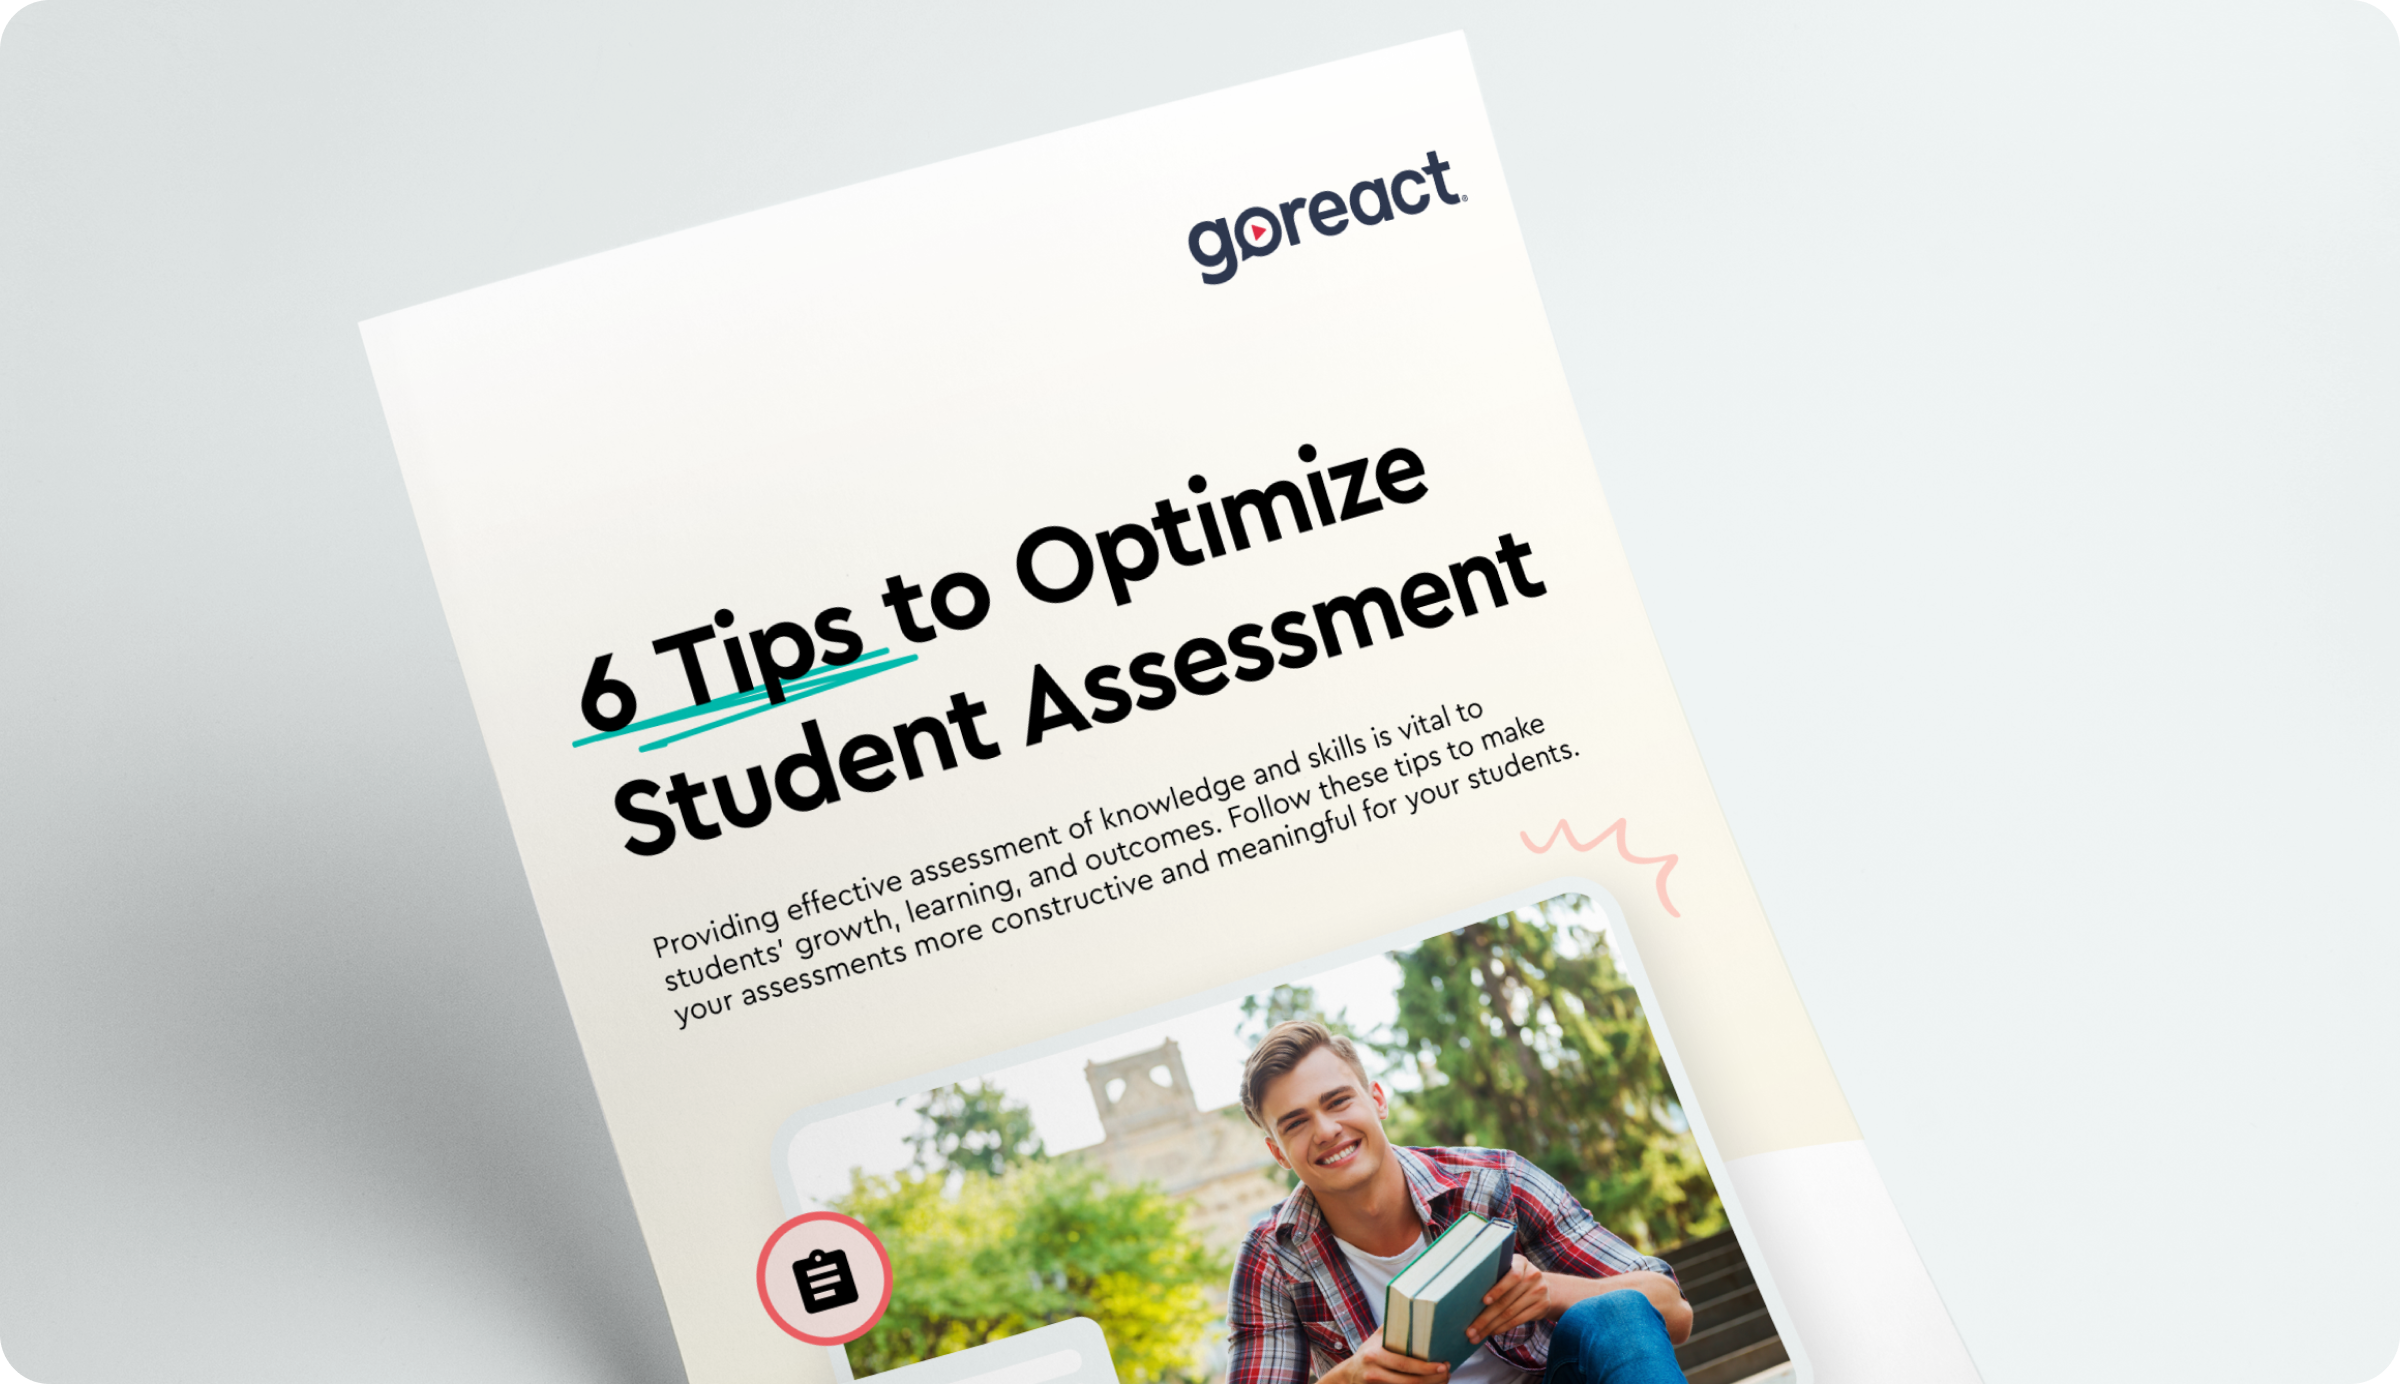 6 Tips to Optimize Student Assessment